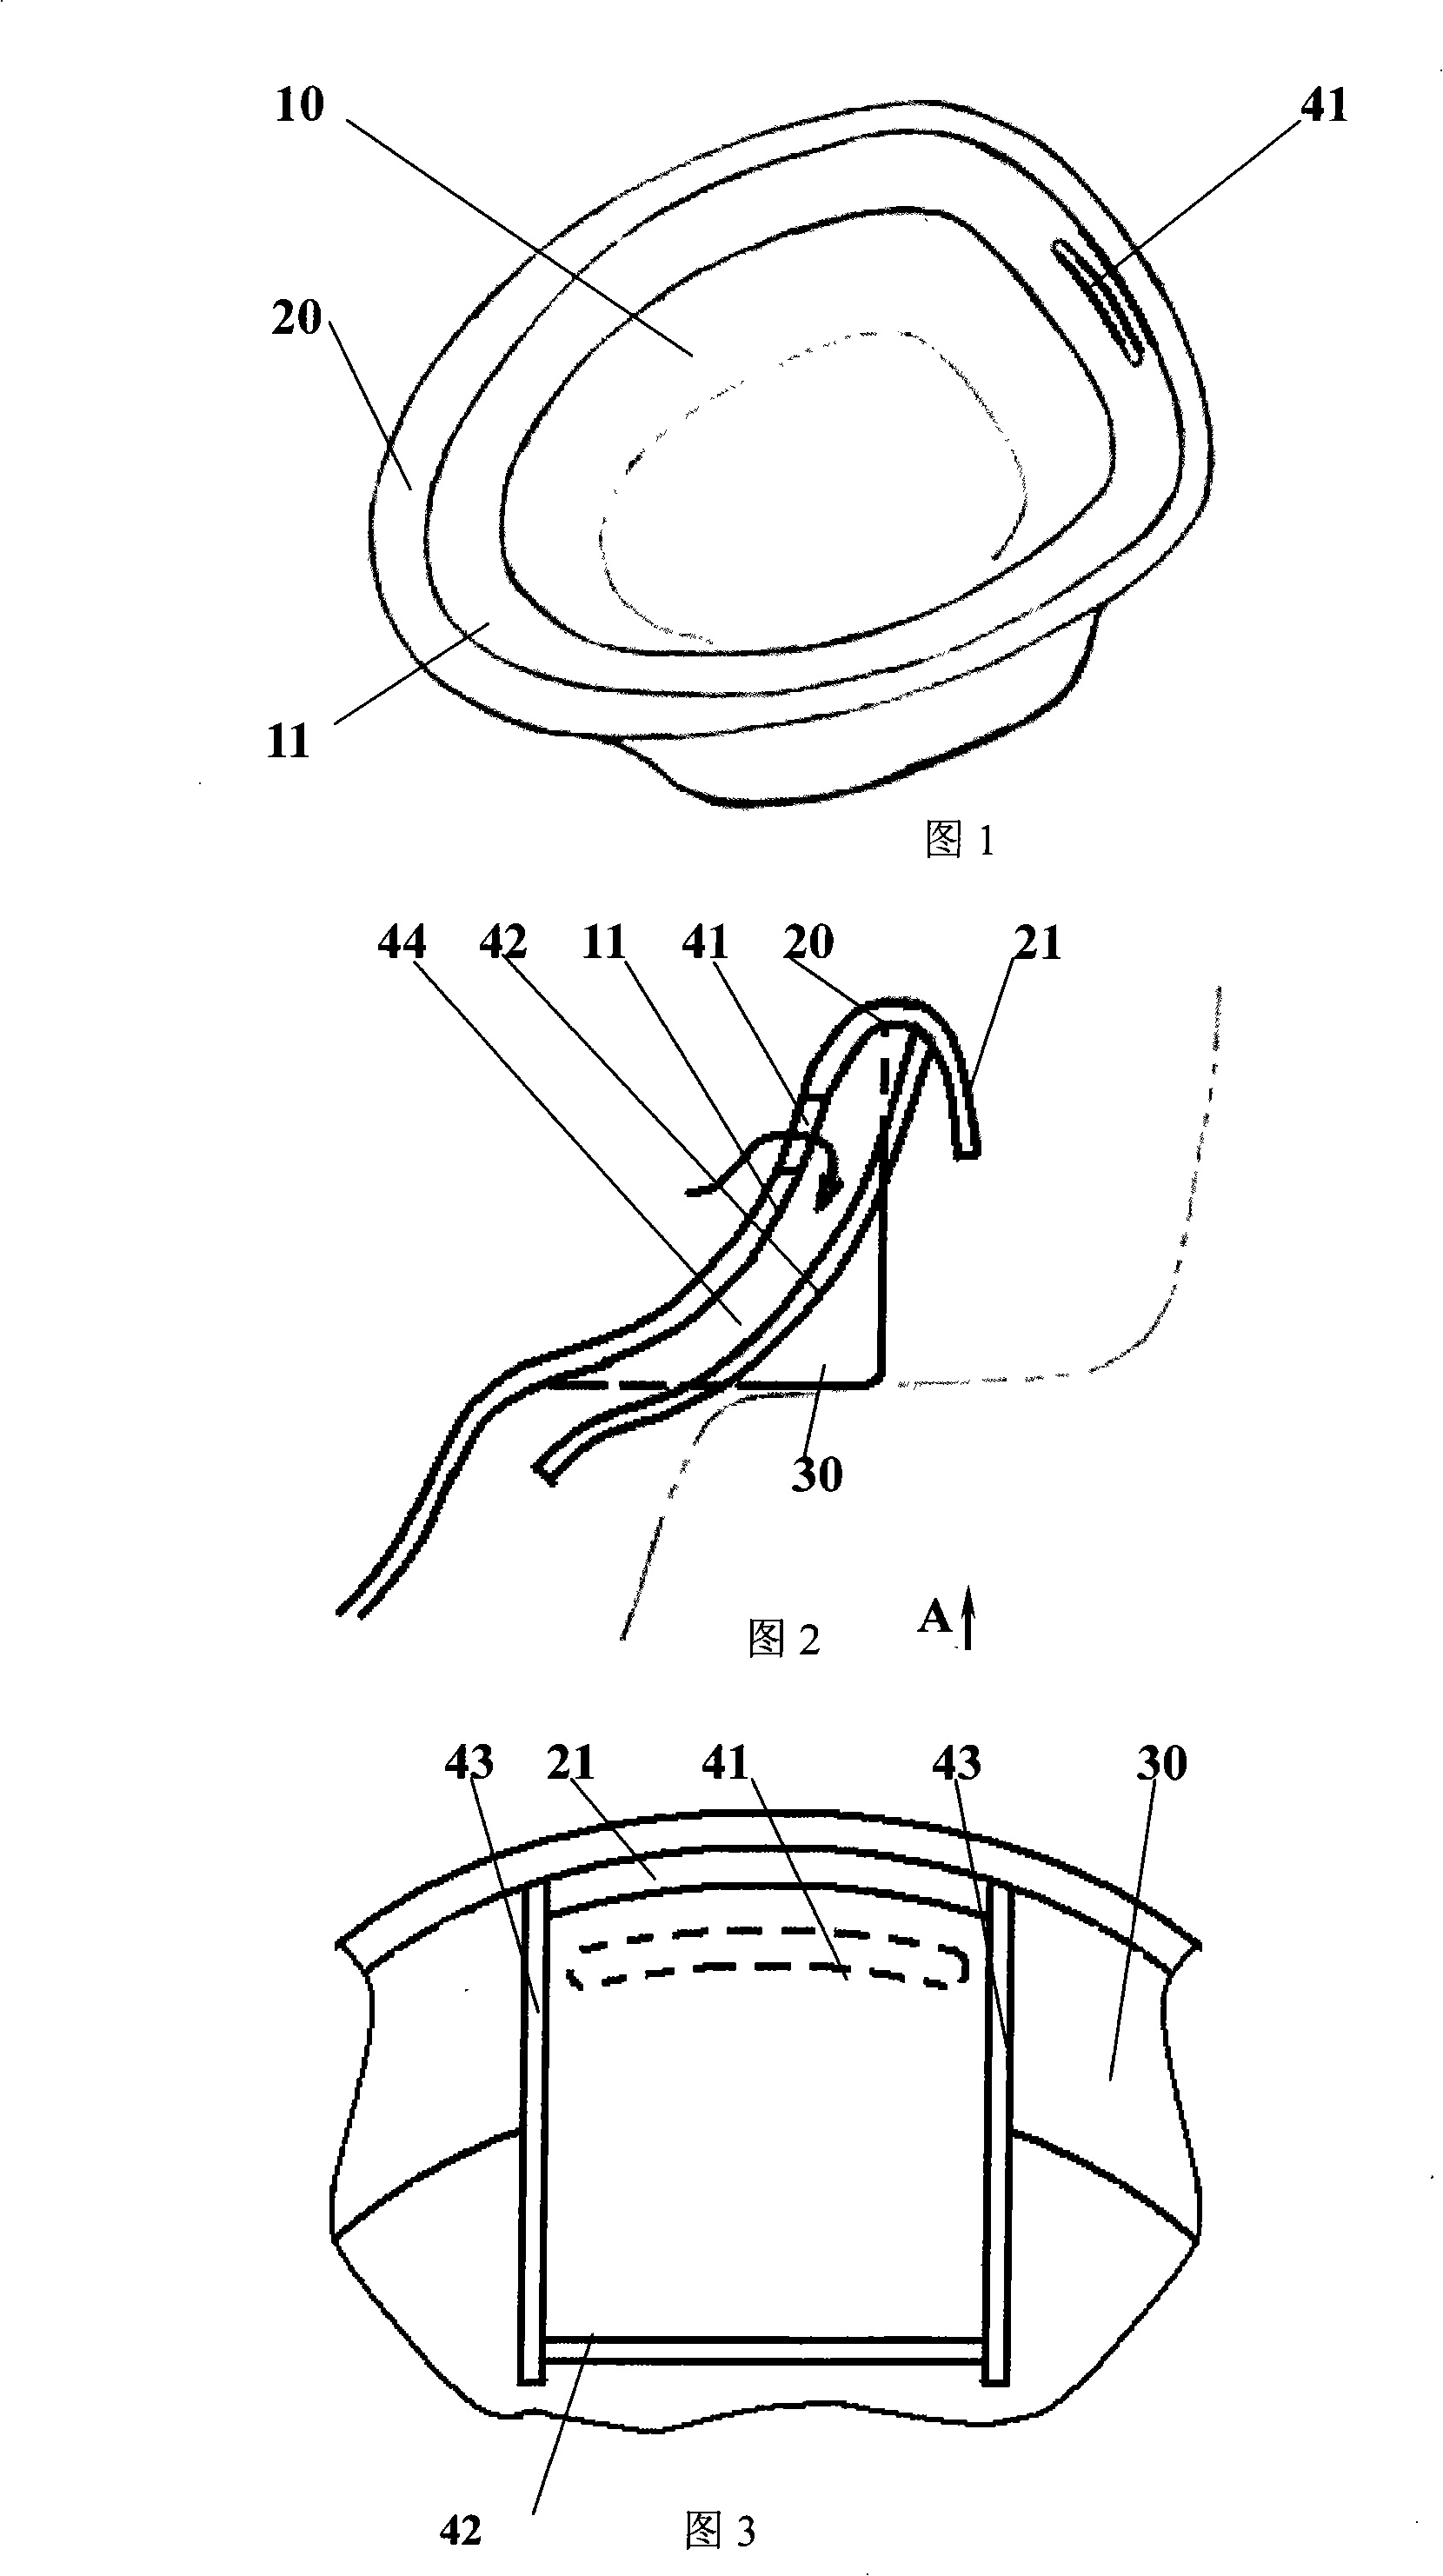 Bidet with hollow cross section support structure adapted for closet